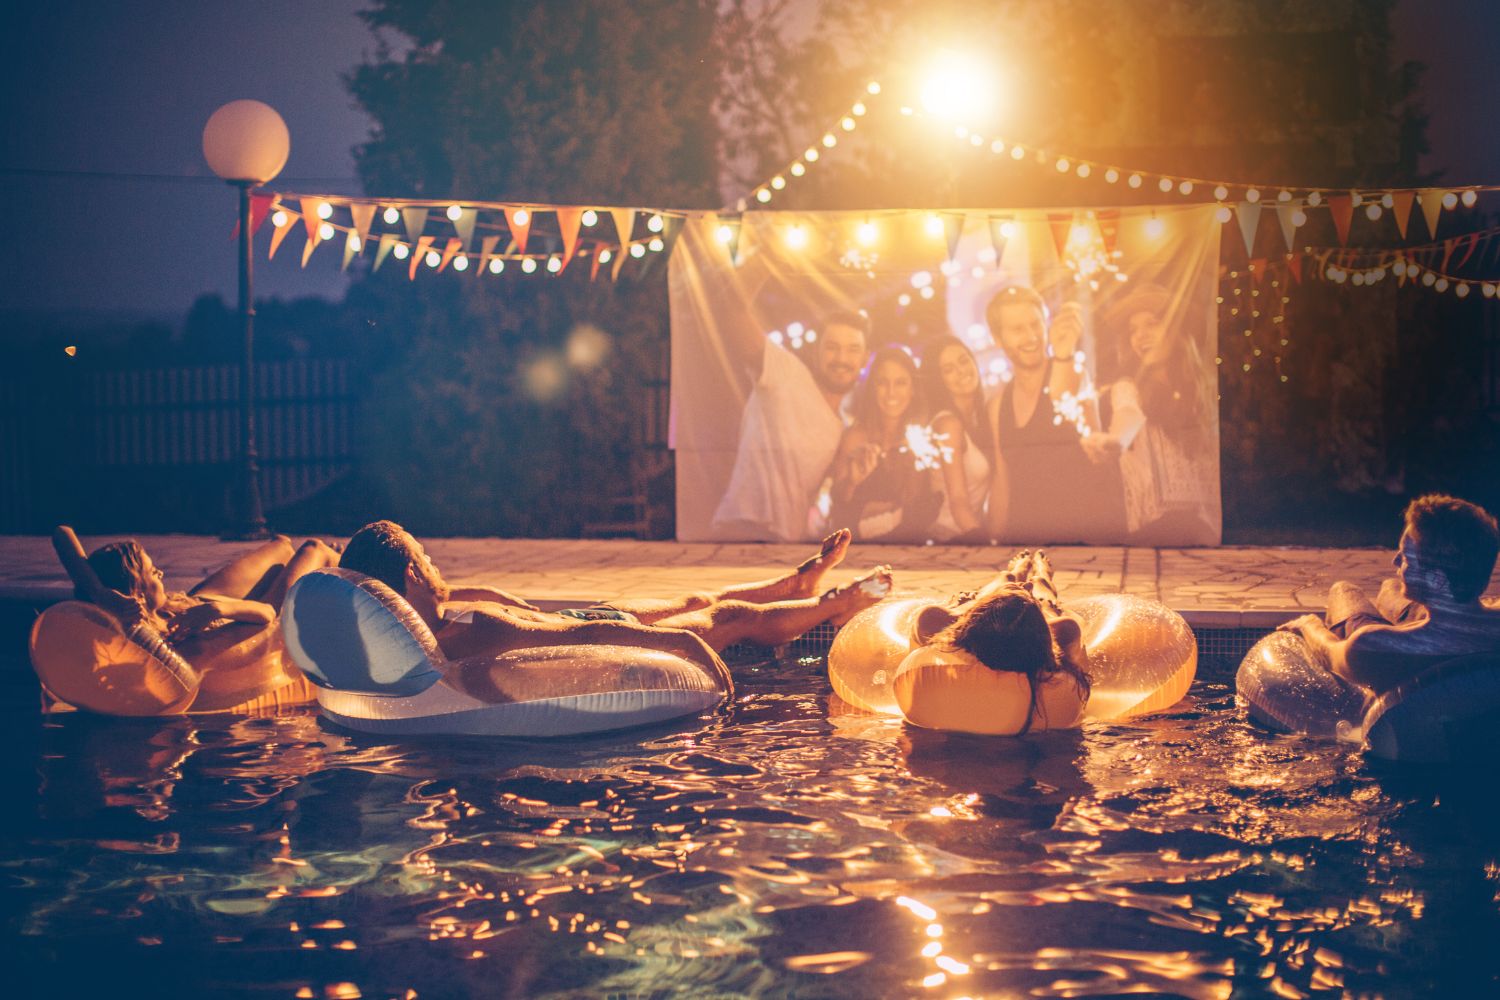 Christmas party ideas for summer time outdoor celebrations young friends movie night party ideas